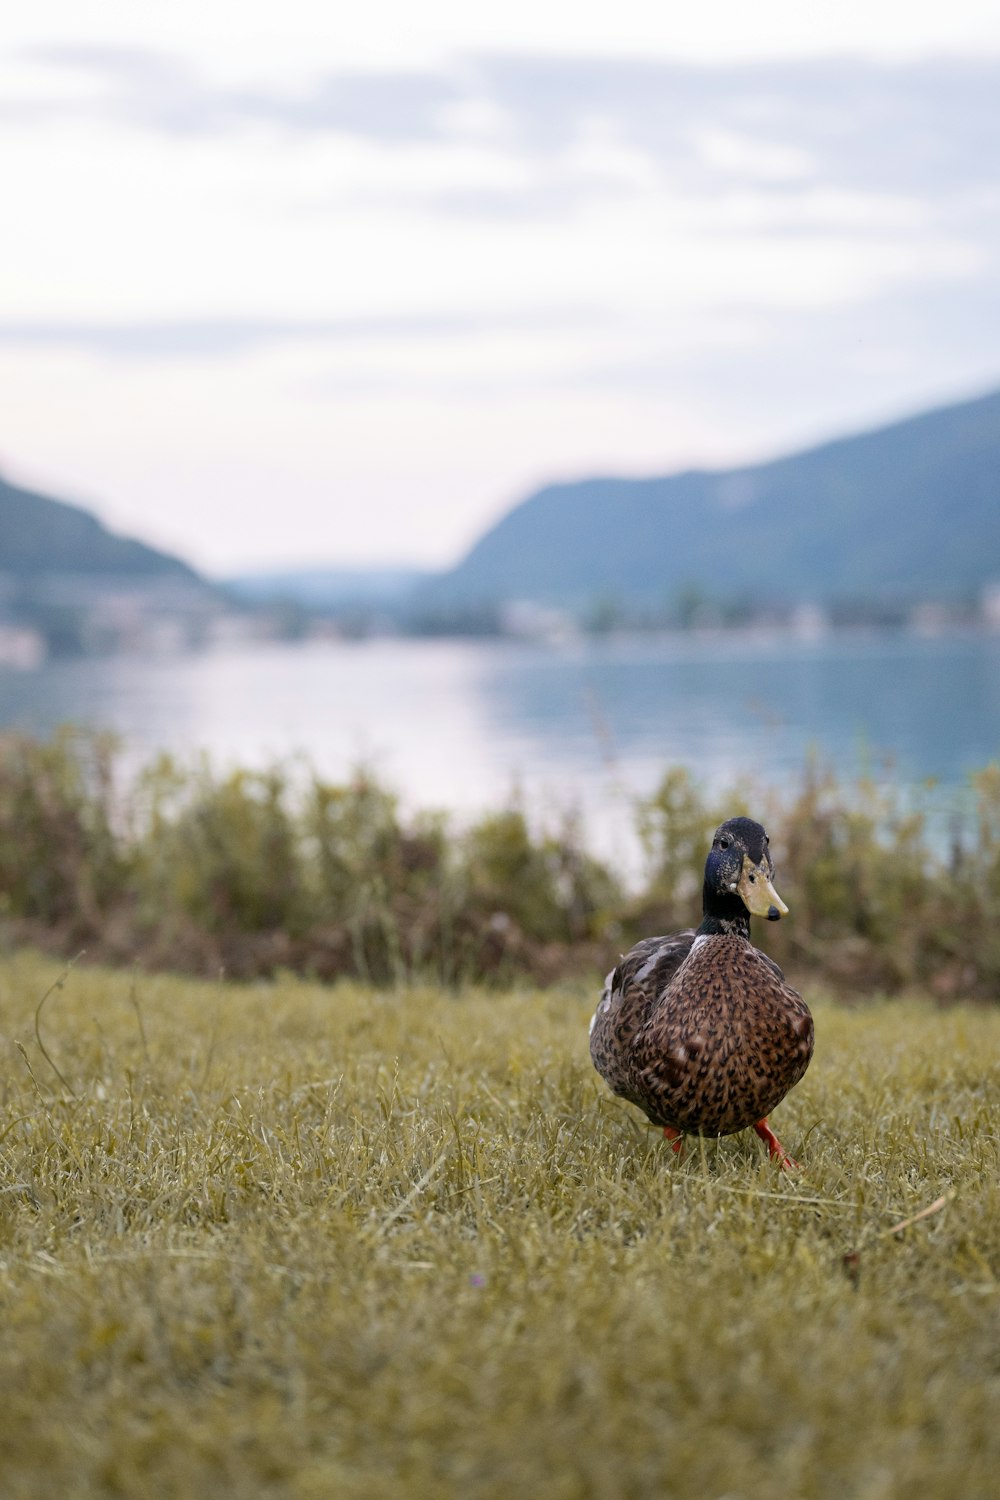 a duck standing in the grass near a body of water